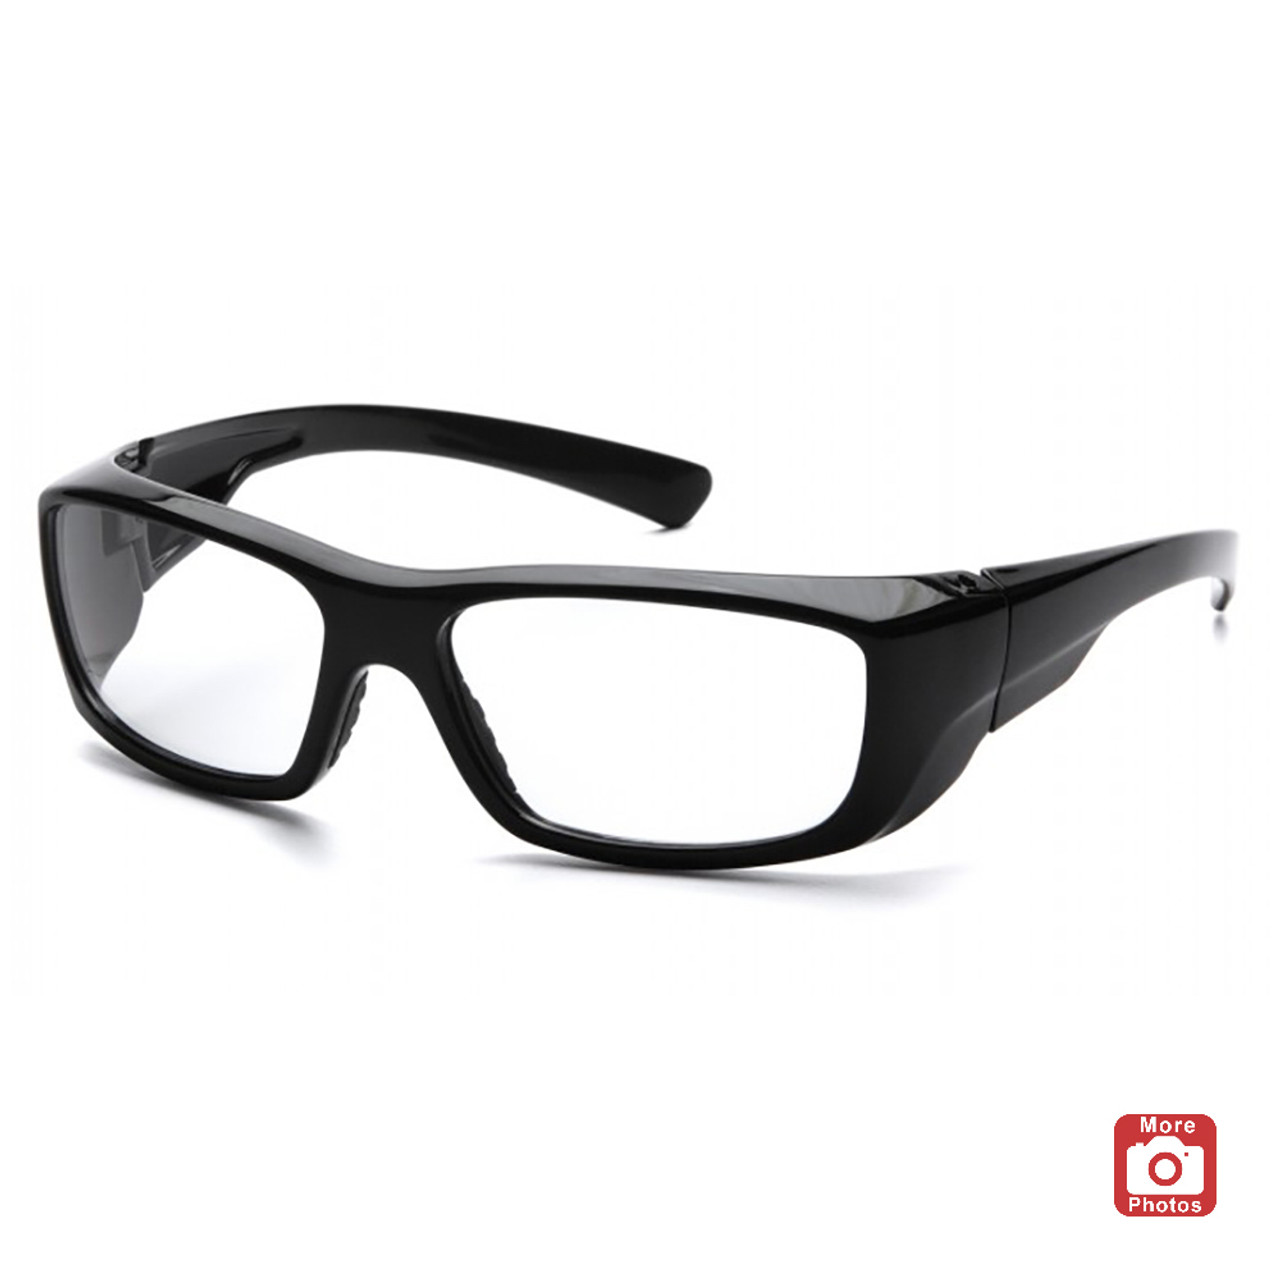 Pyramex, Emerge Series, Safety Glasses with Clear Lens